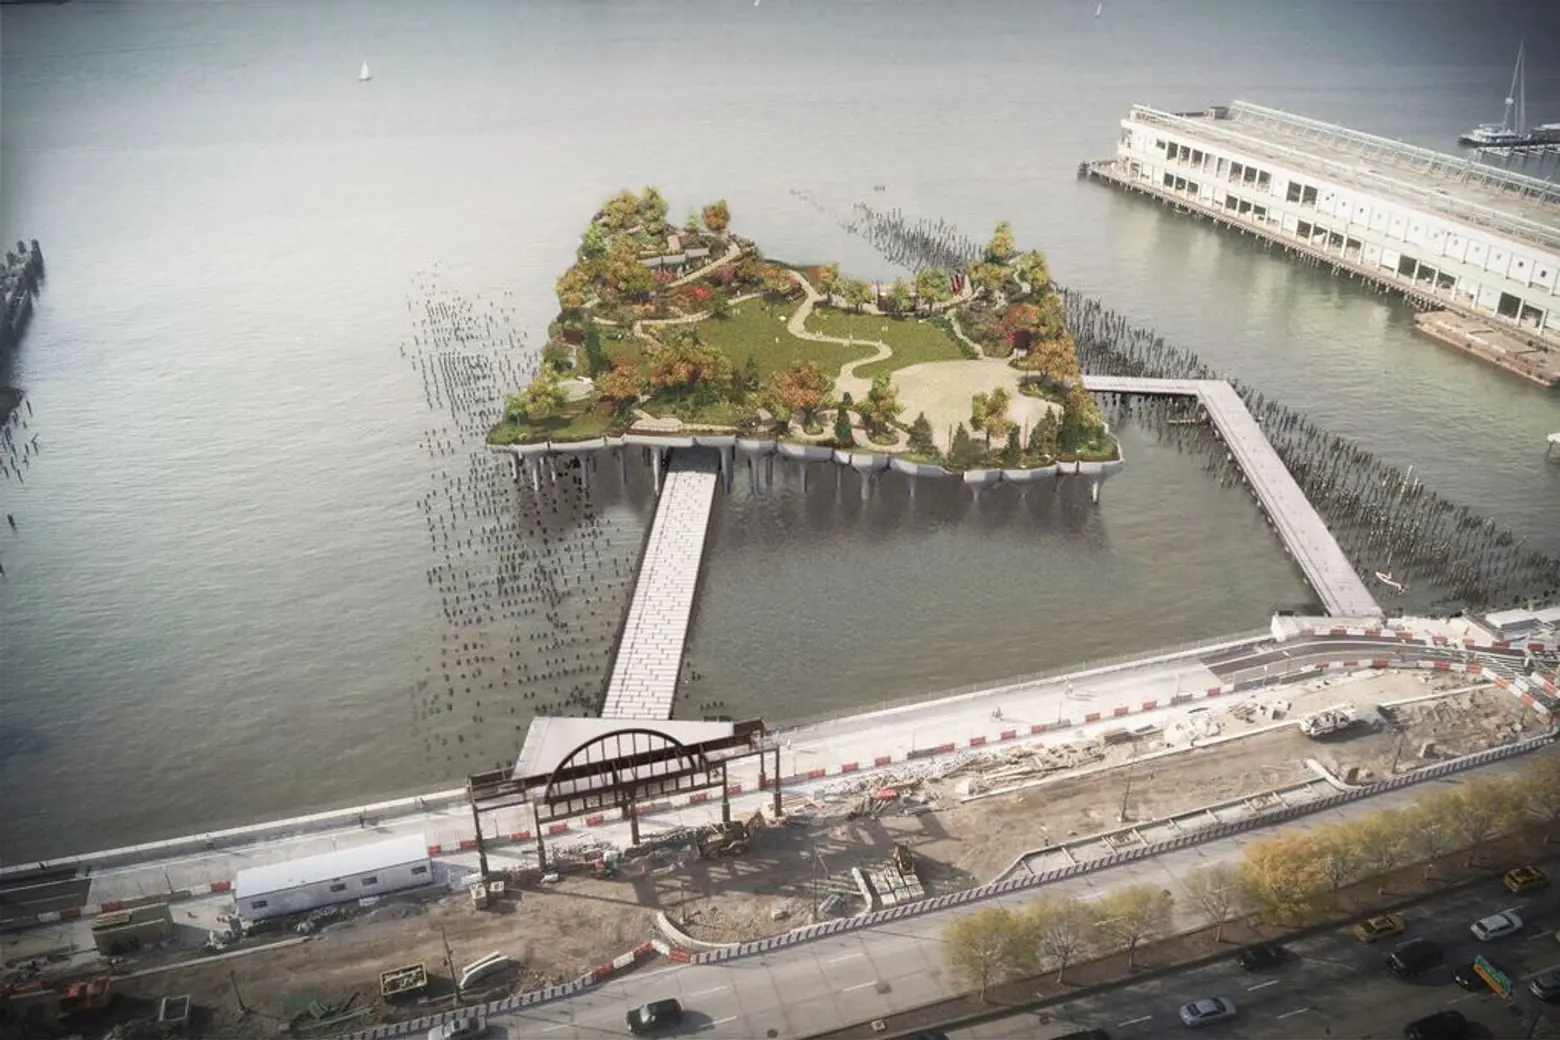 Construction restarts at Pier 55 offshore park with new walkways in place